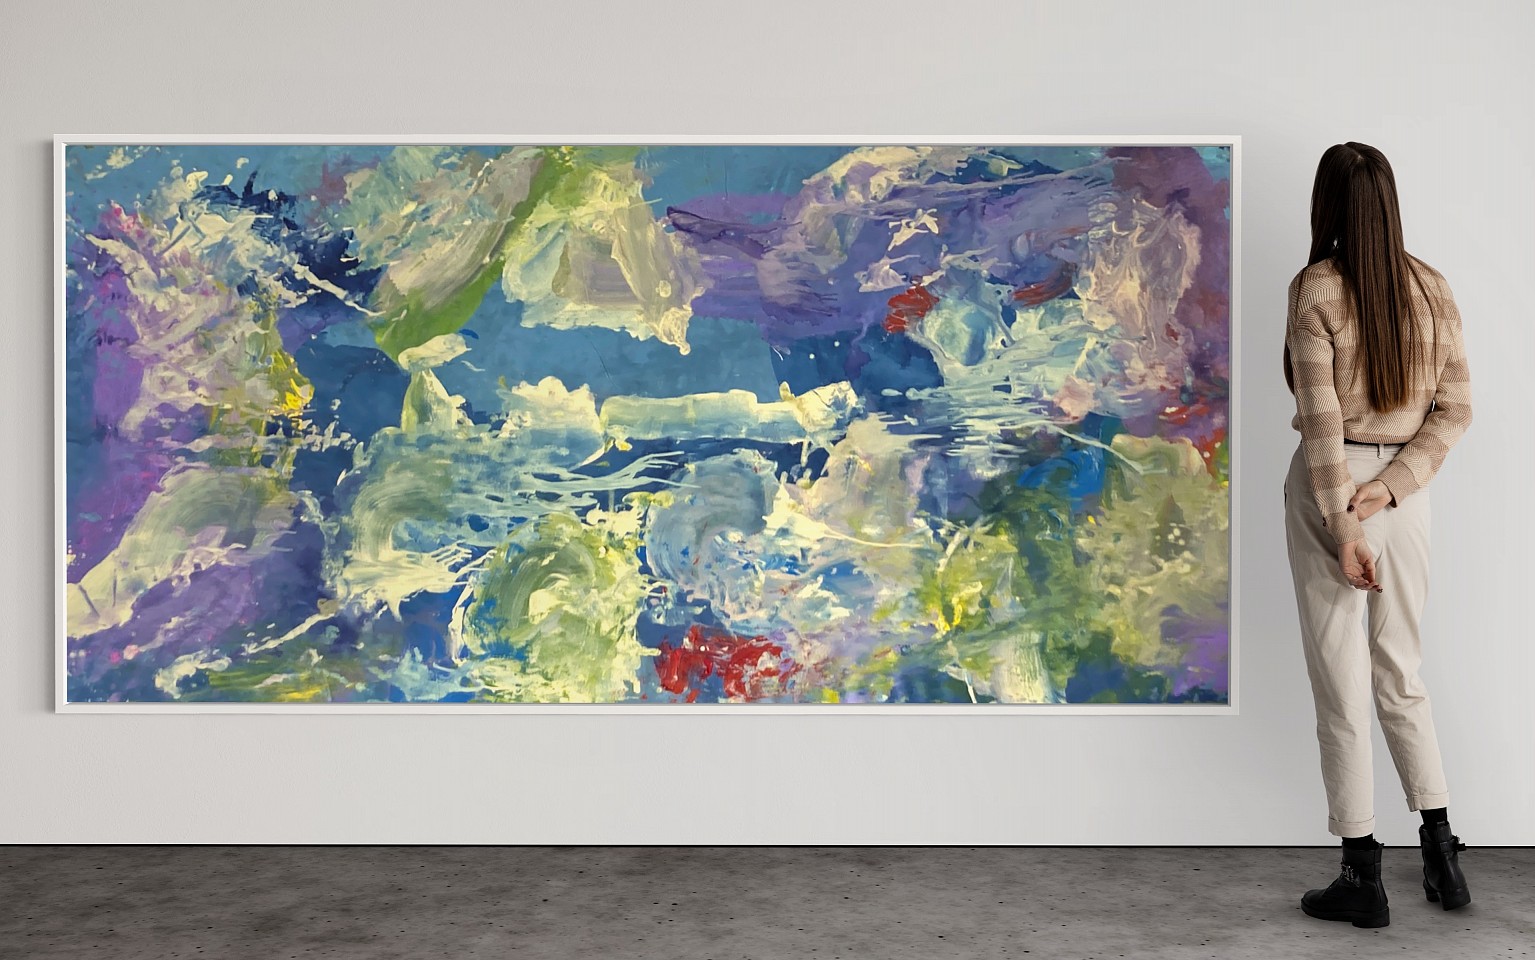 Suzanne  LaFleur, The Great Blue, 2022
Acrylic on canvas, 56 x 117 in.
LAF002